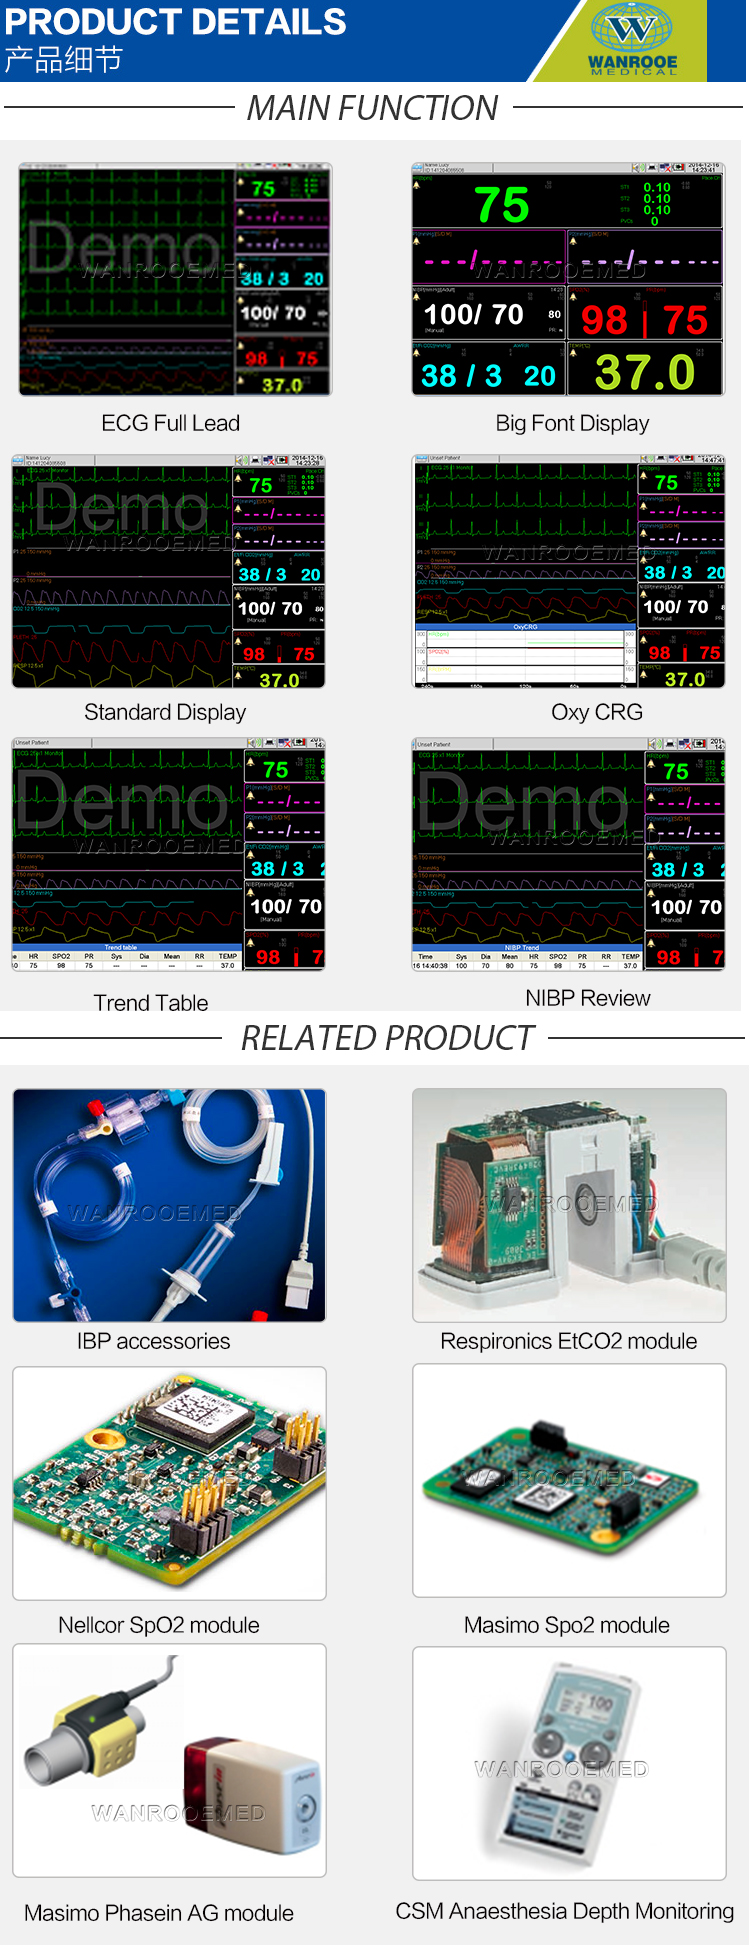 Patient Monitor,Medical Patient Monitor,Multi-parameter Patient Monitor,Portable Patient Monitor,Hospital Patient Monitor